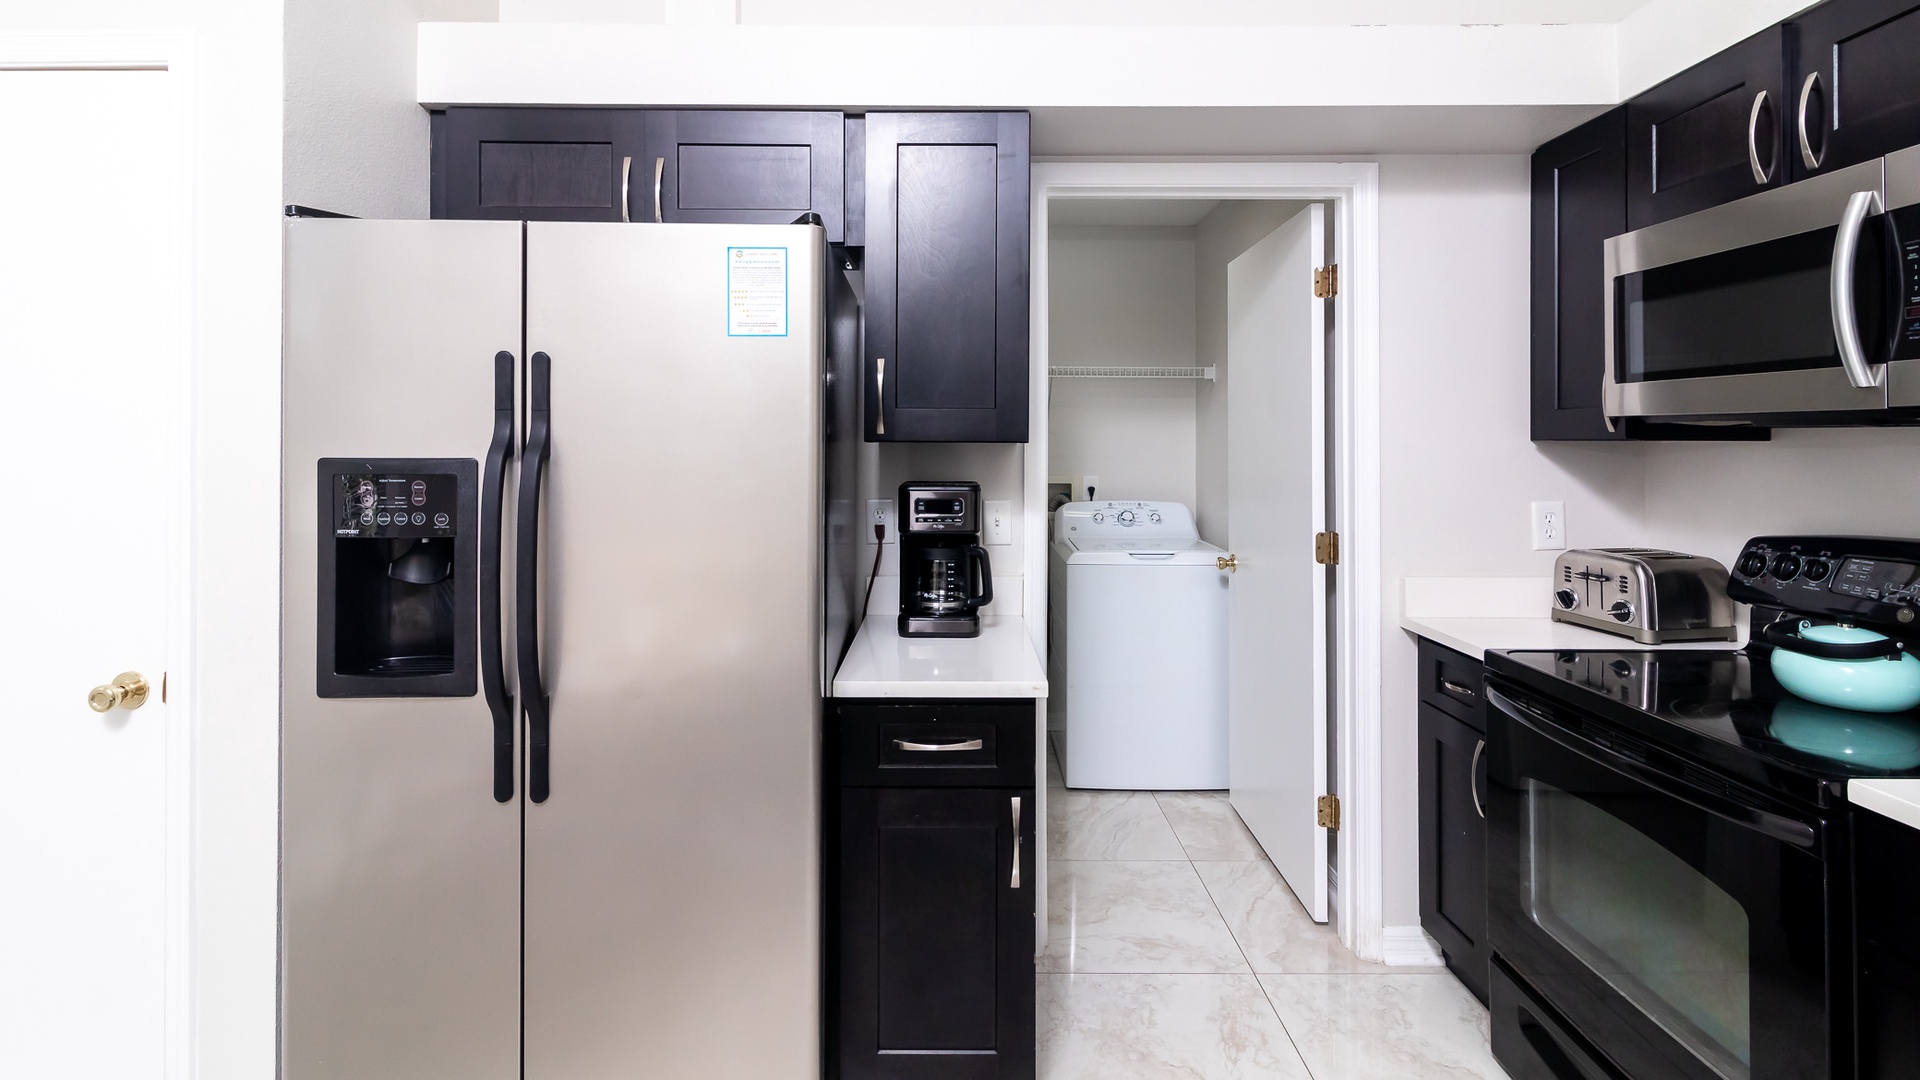 Kitchen with laundry room accessibility